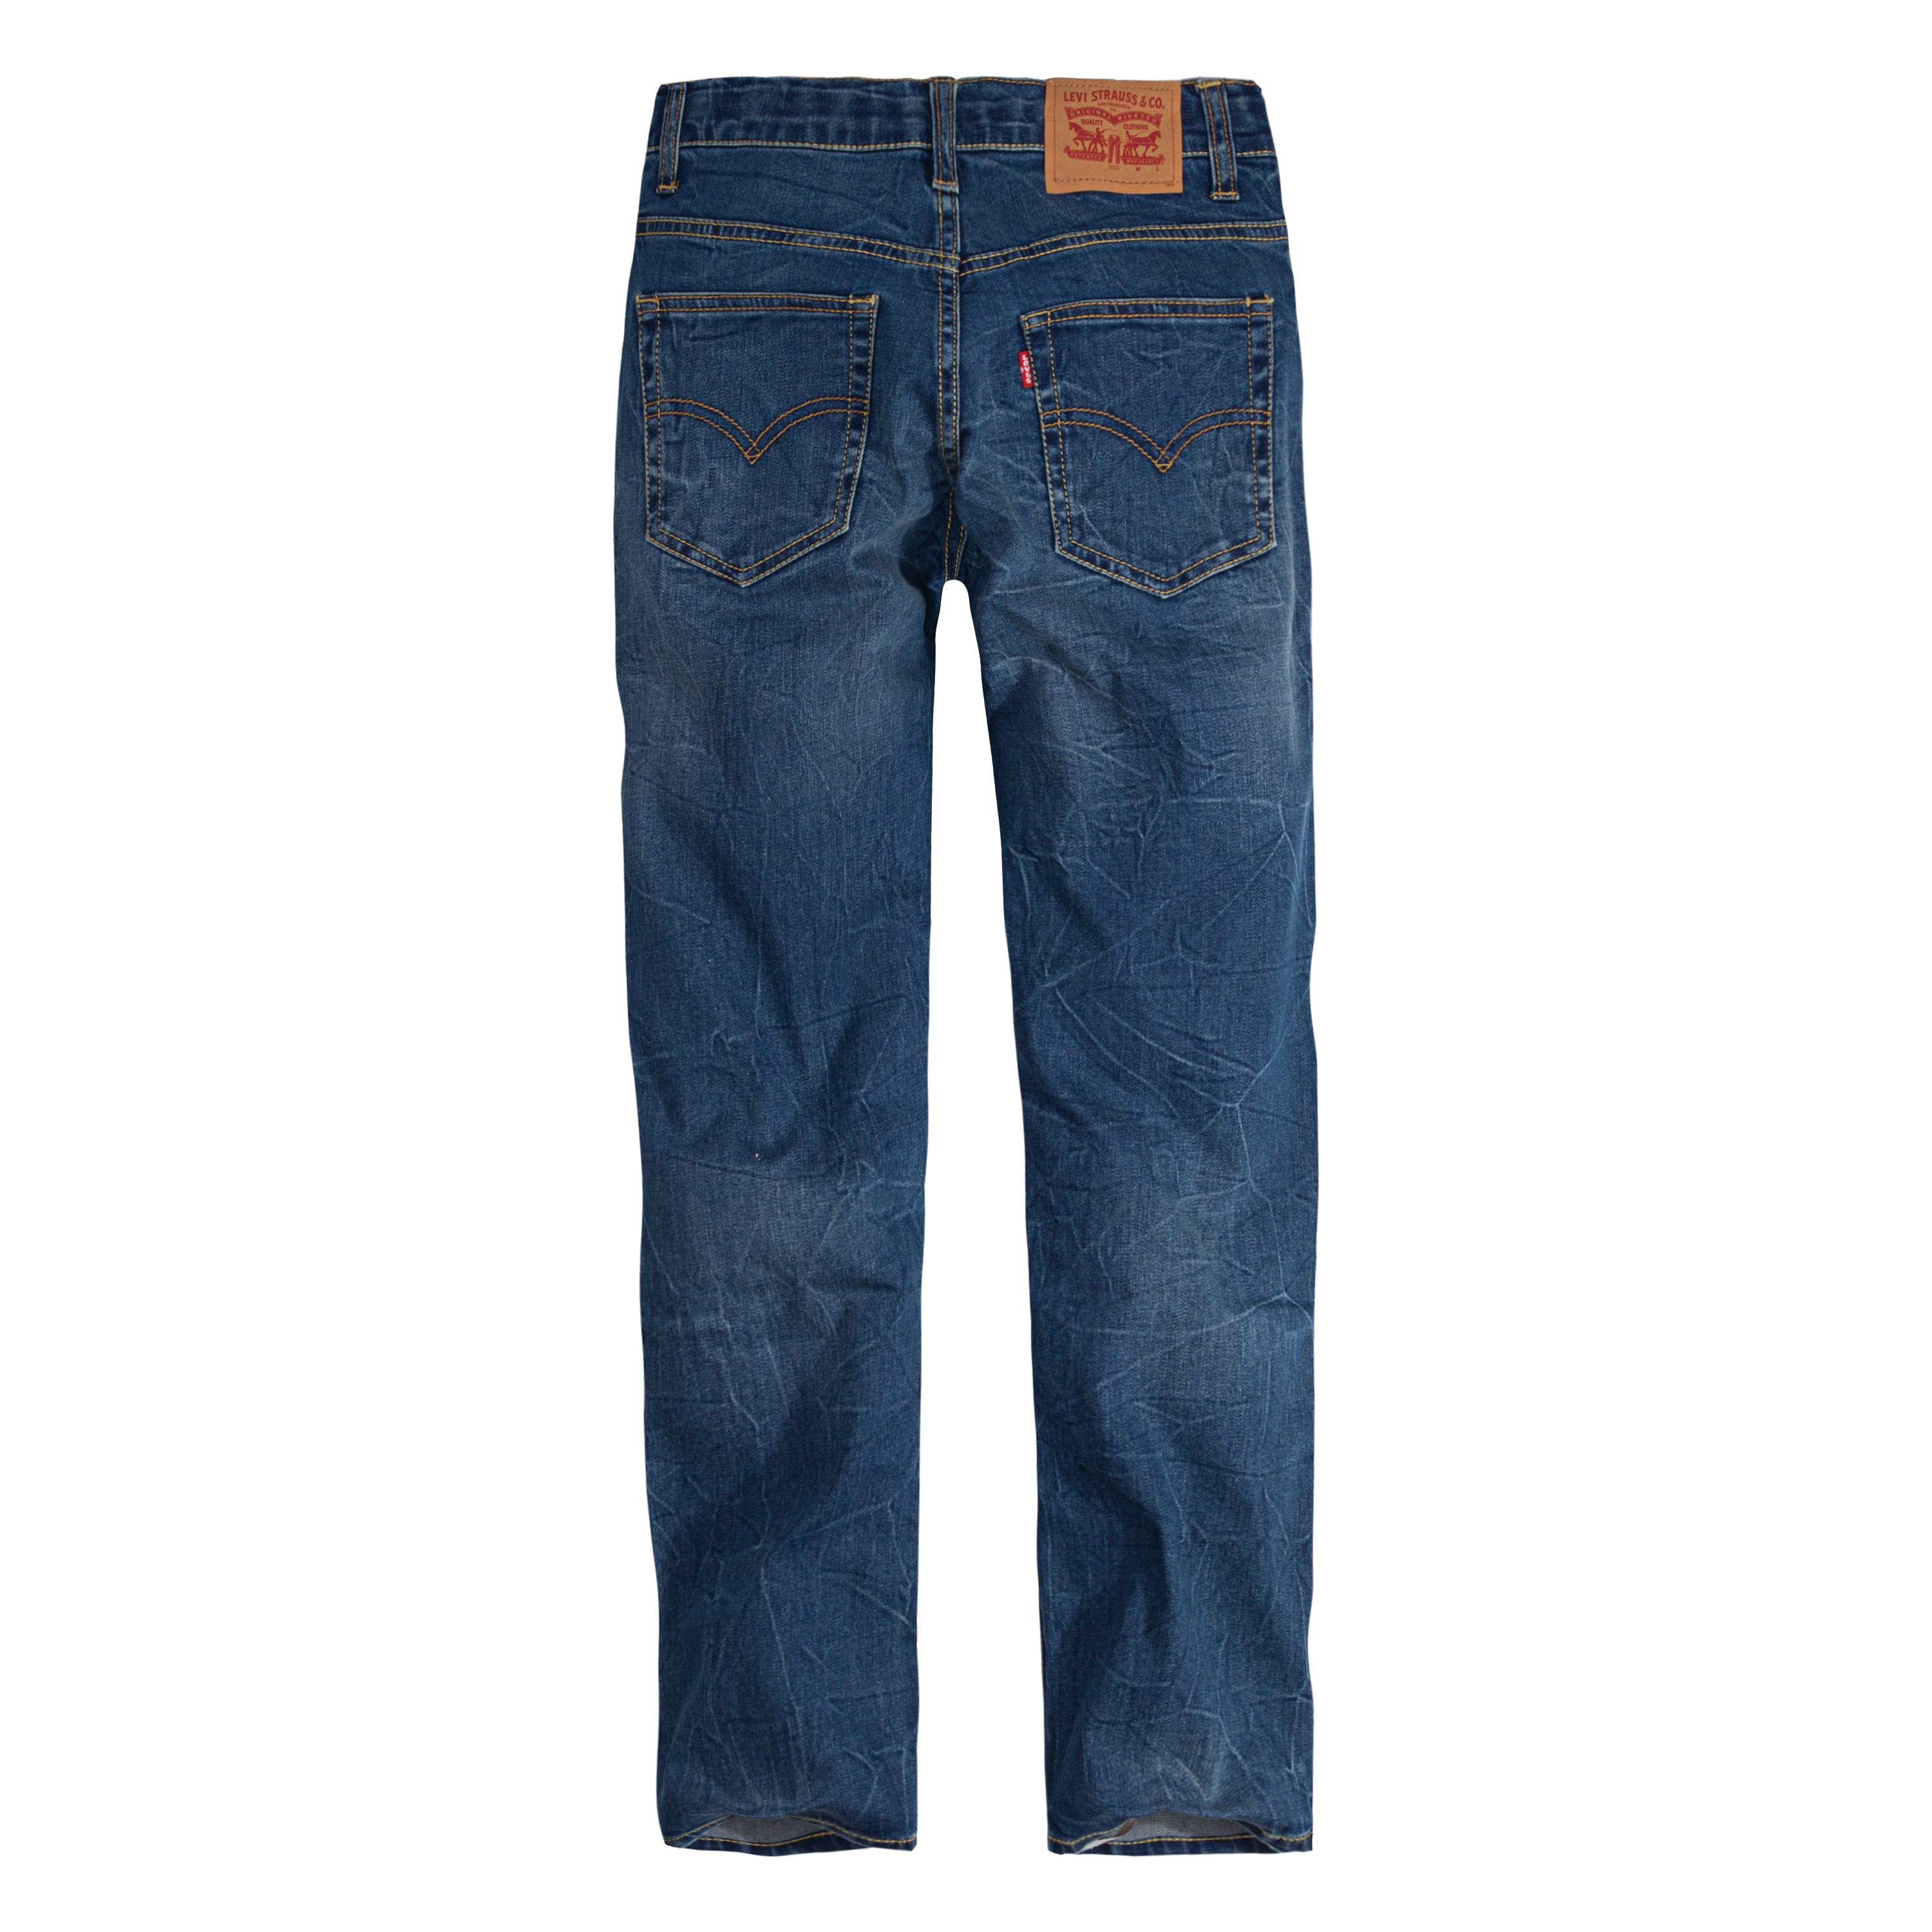 Boys 502 Taper Fit Jeans, Sizes 